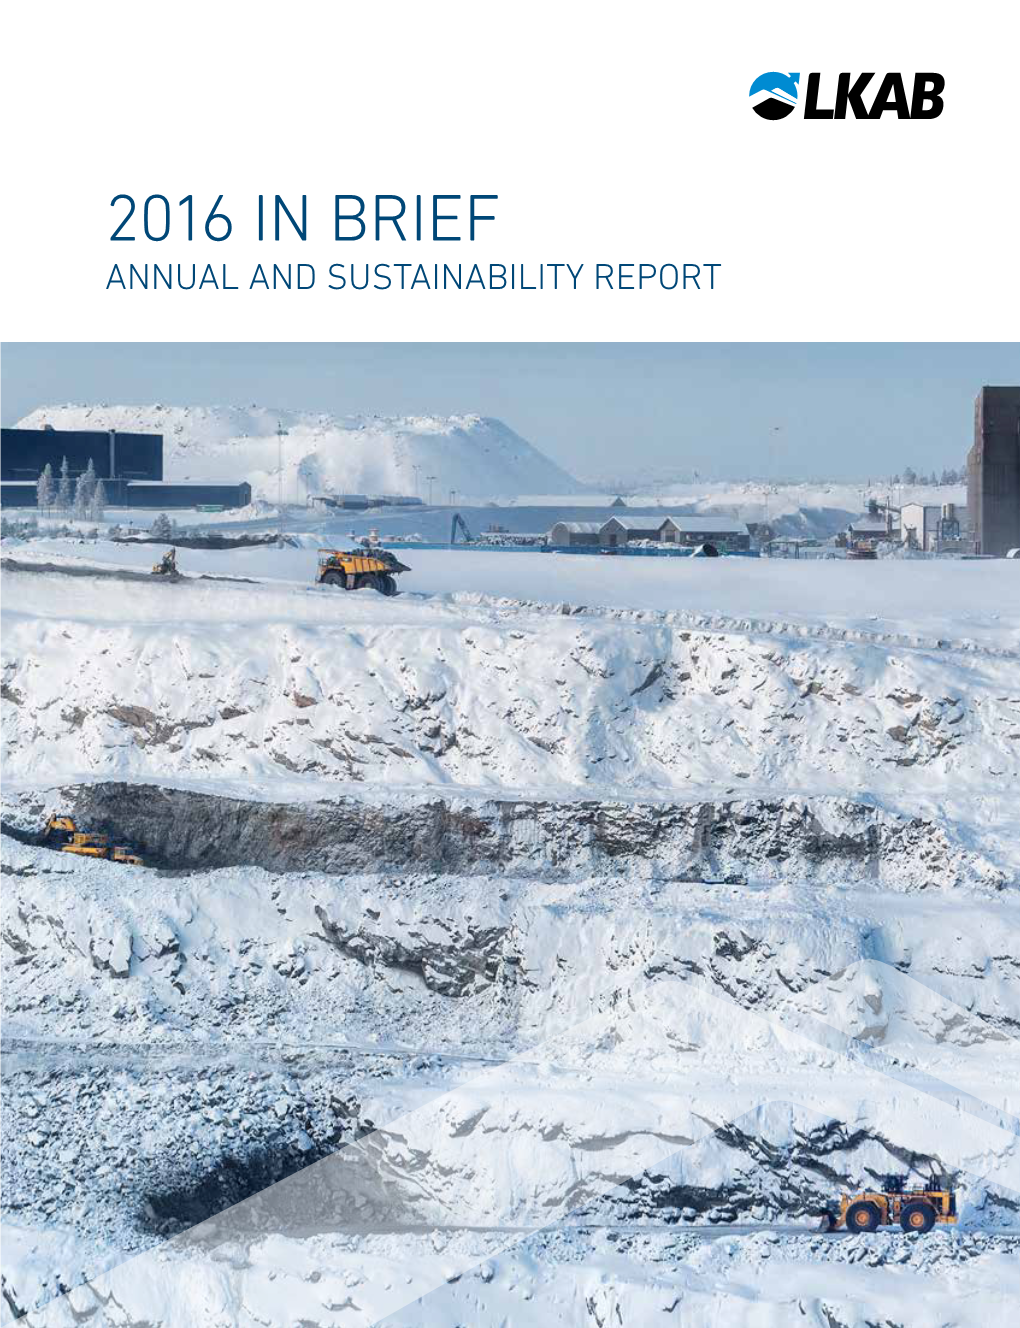 LKAB 2016 in Brief Annual and Sustainability Report